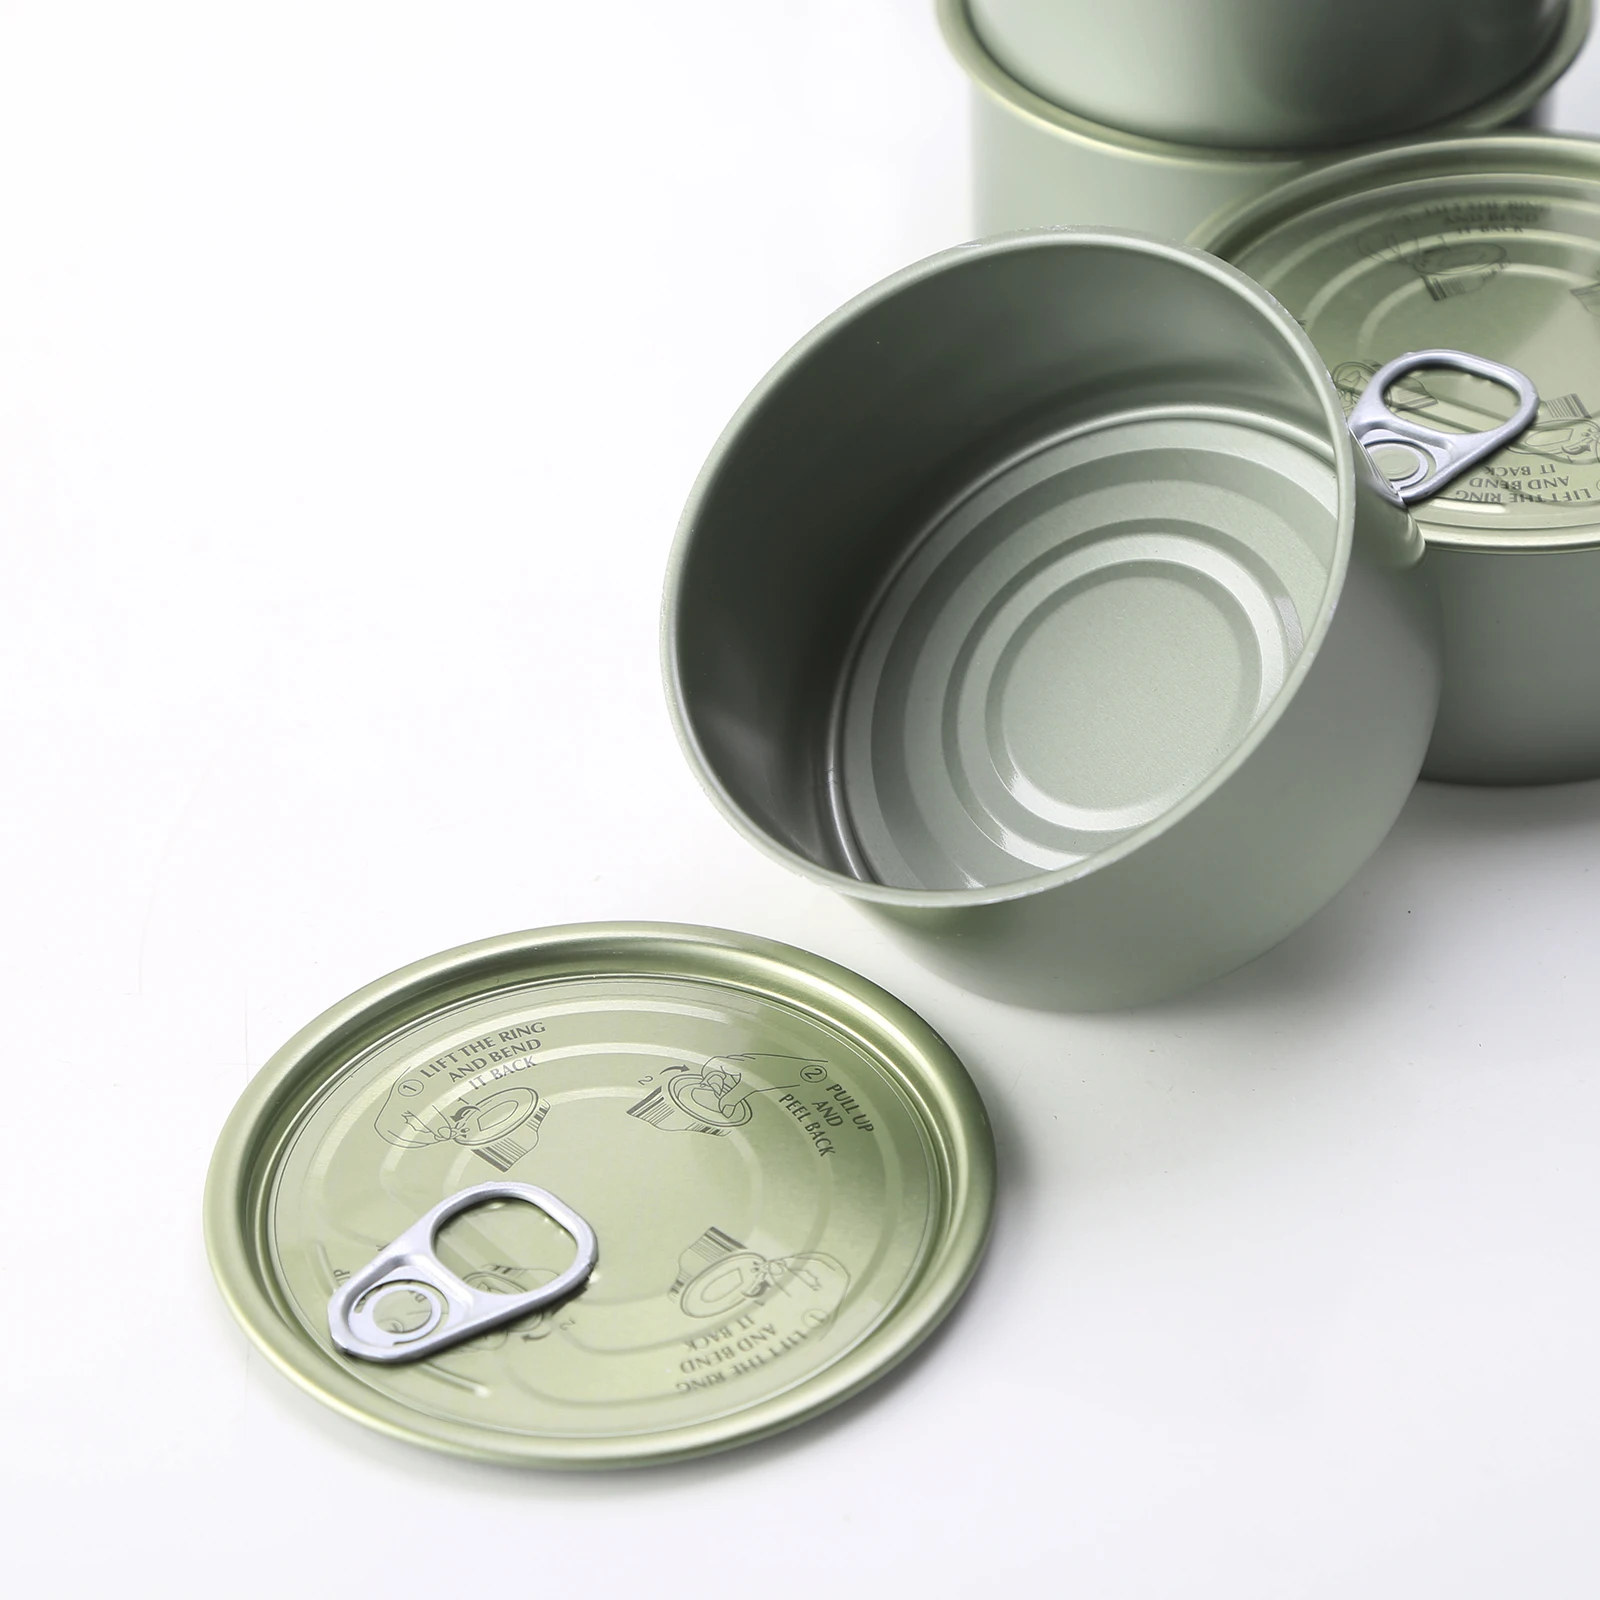 Round Tin Storage Can Press In Machine Seal Tin Can with Ring Lid Bottle Container for Chilli Sauce Tea Storage Jar Cosmetic Box